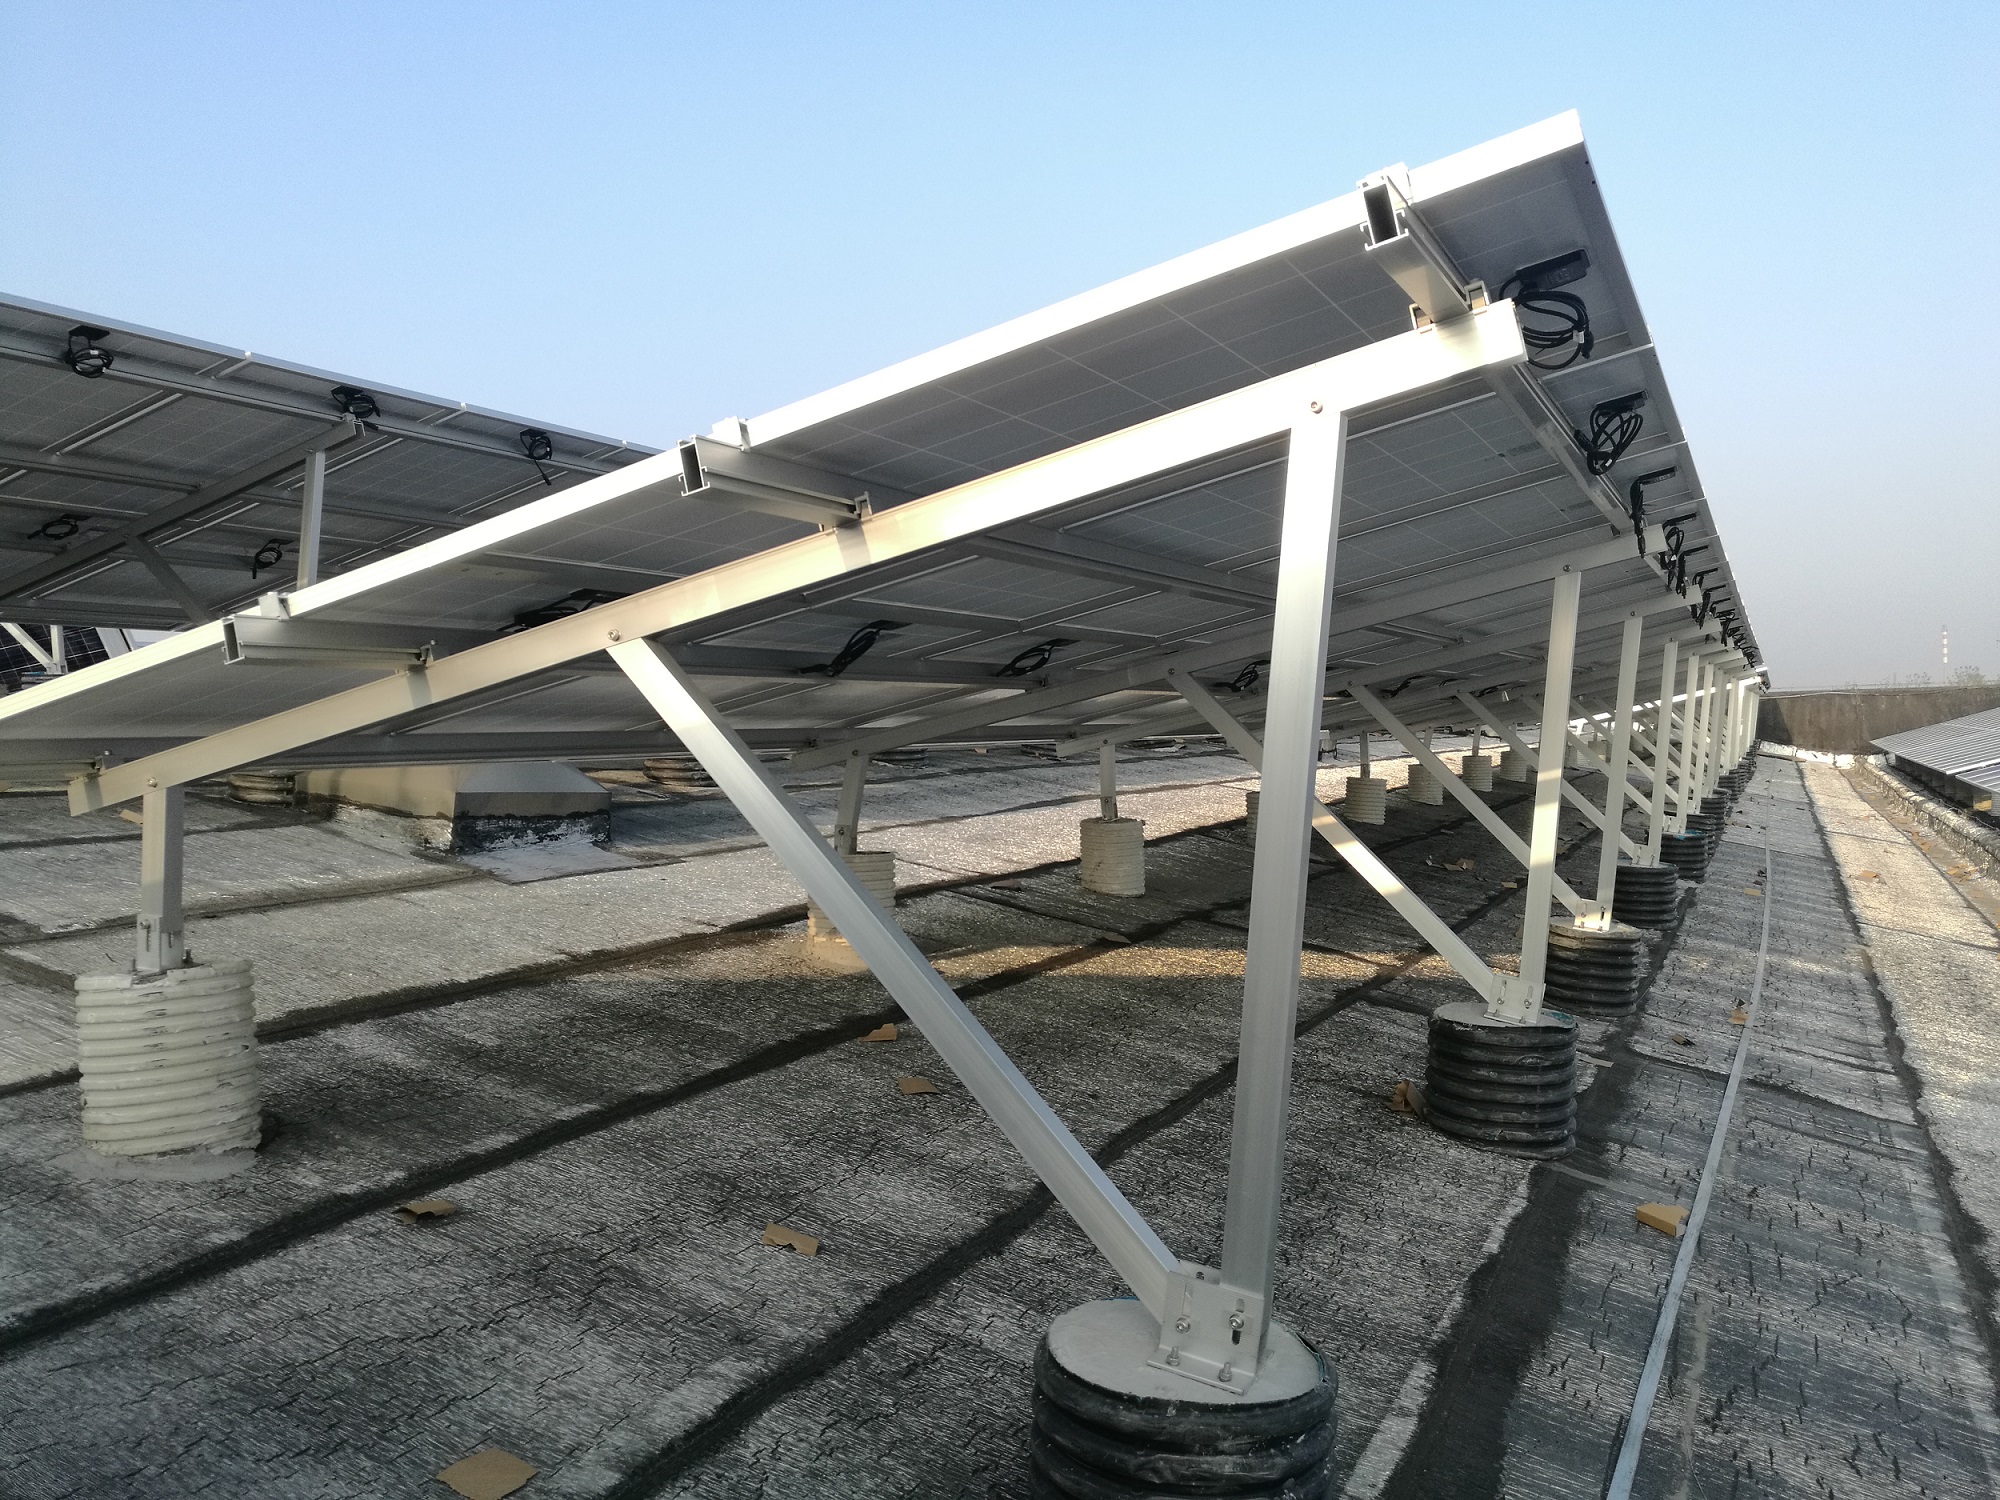 Flat roof structure